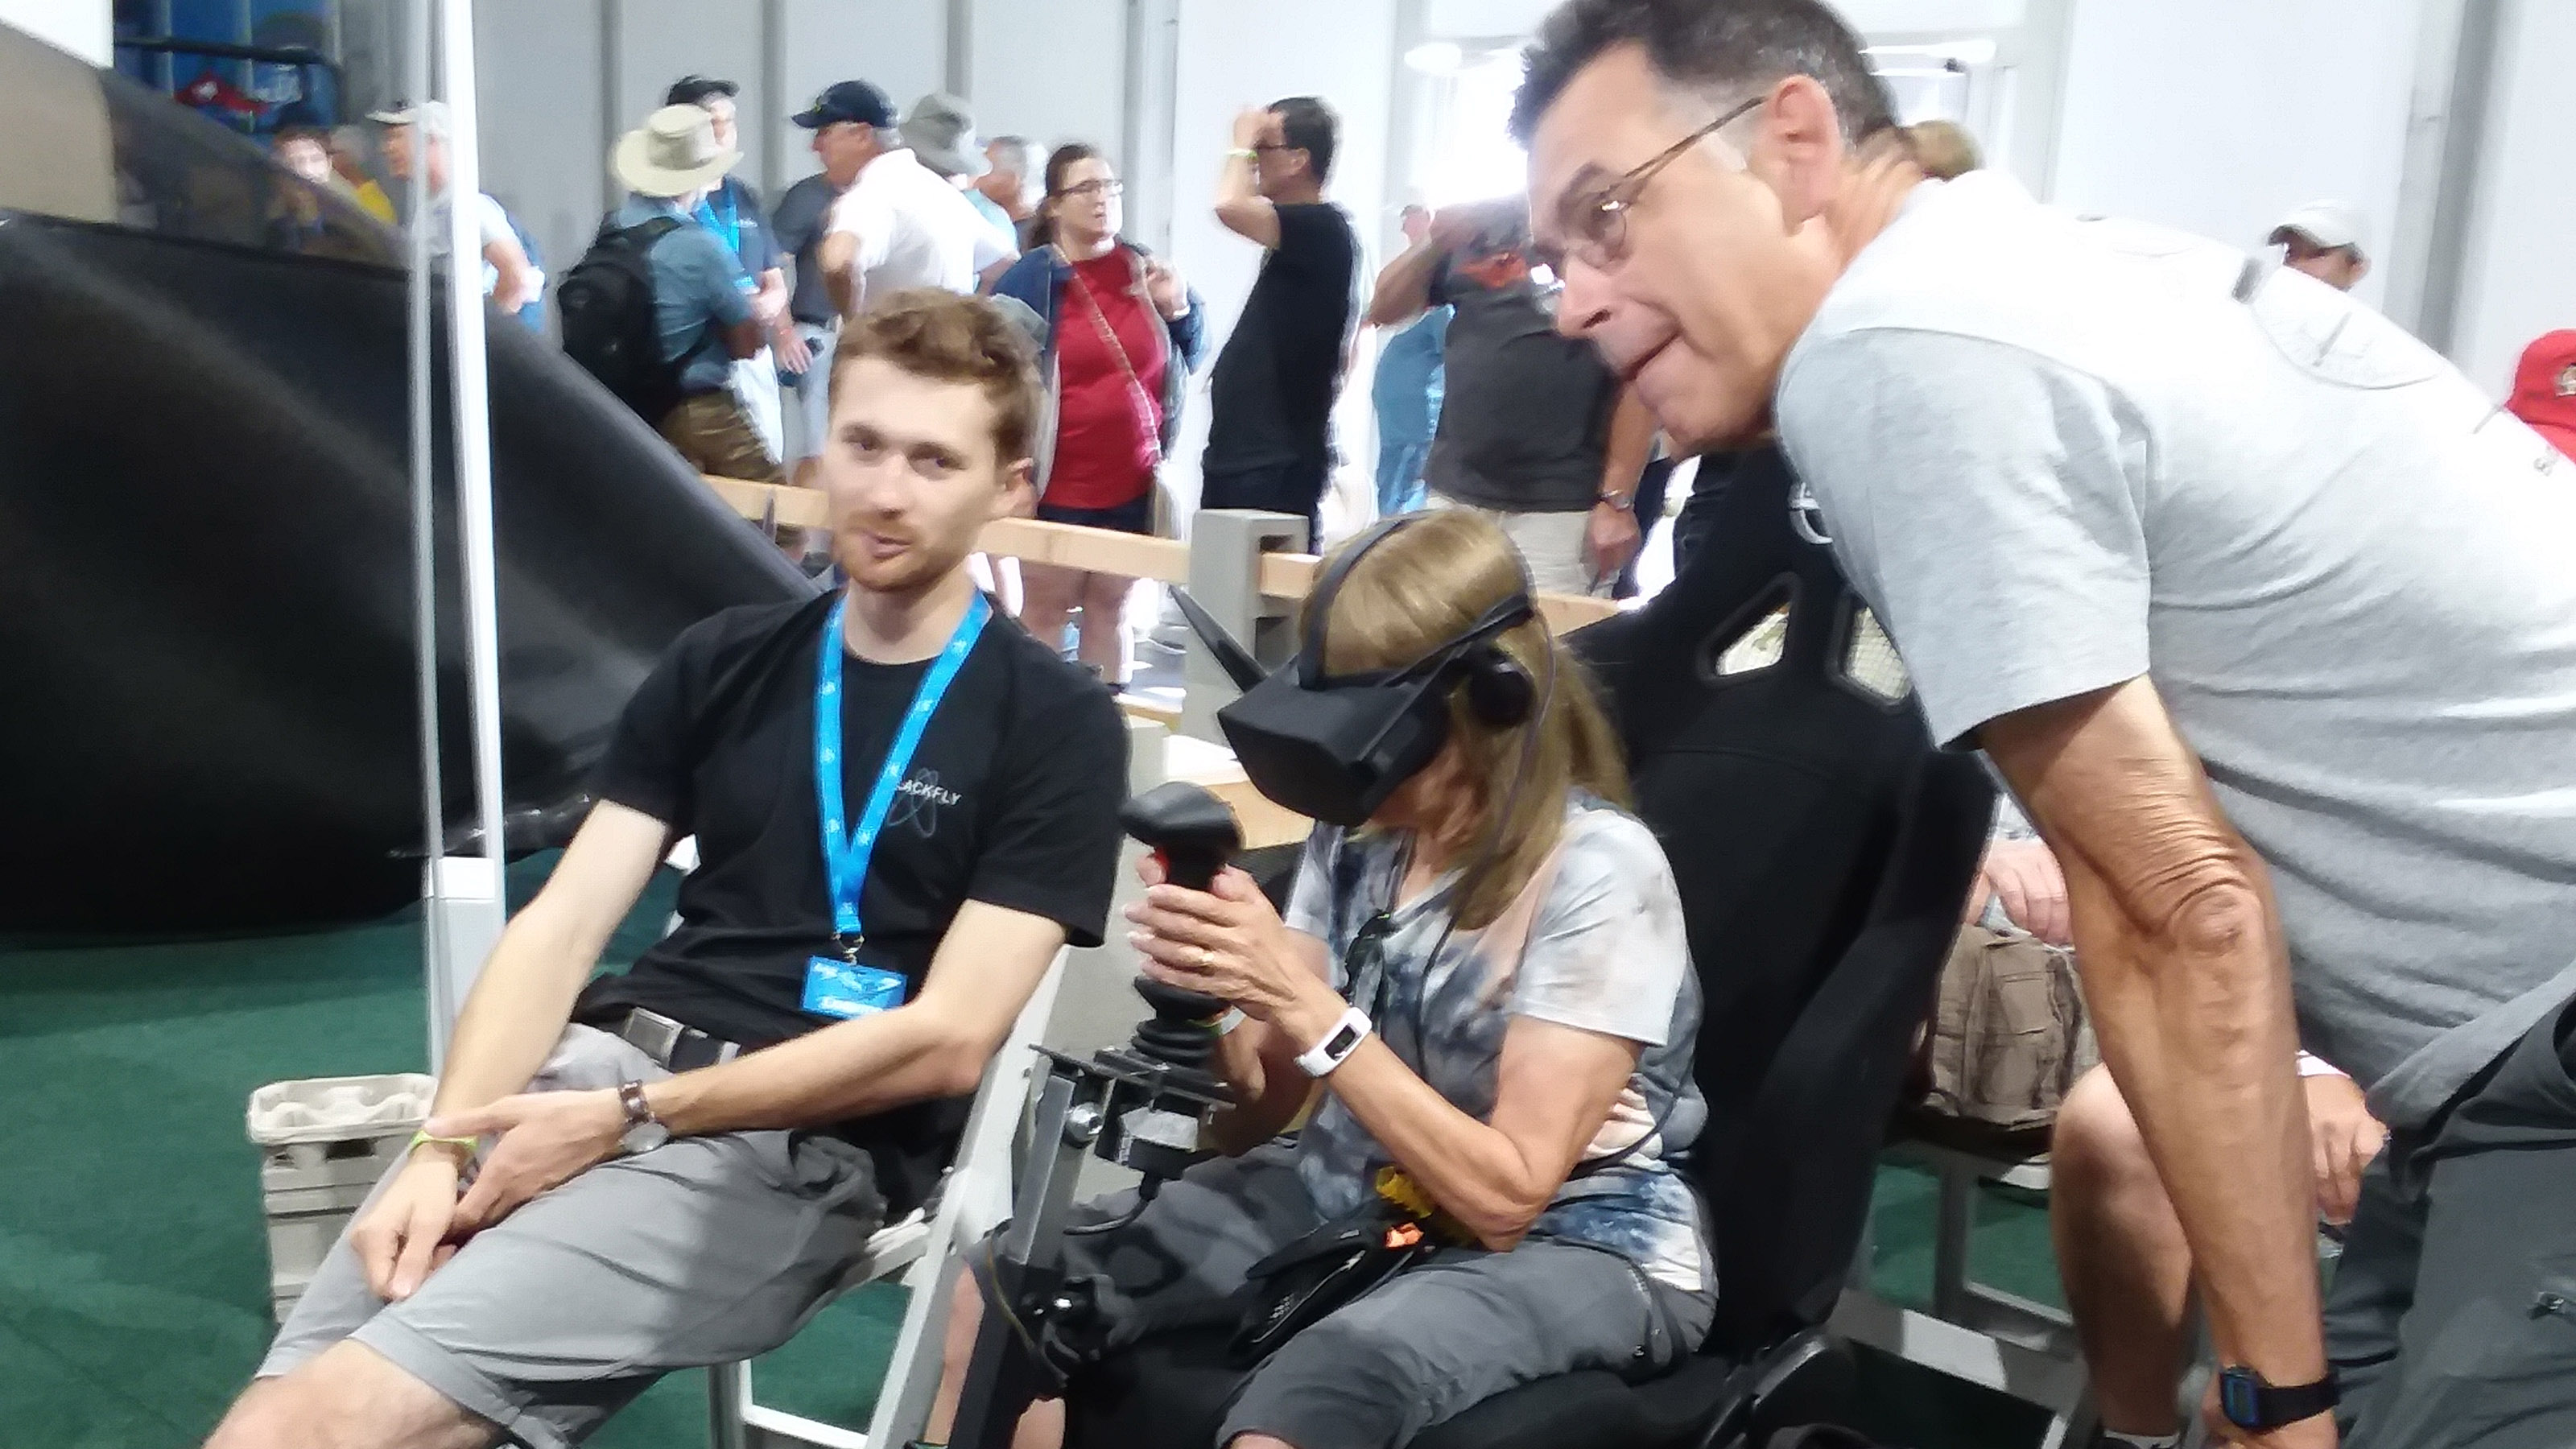 EAA AirVenture attendees can try their hand at virtually flying the Opener BlackFly. Photo by Alyssa Cobb.